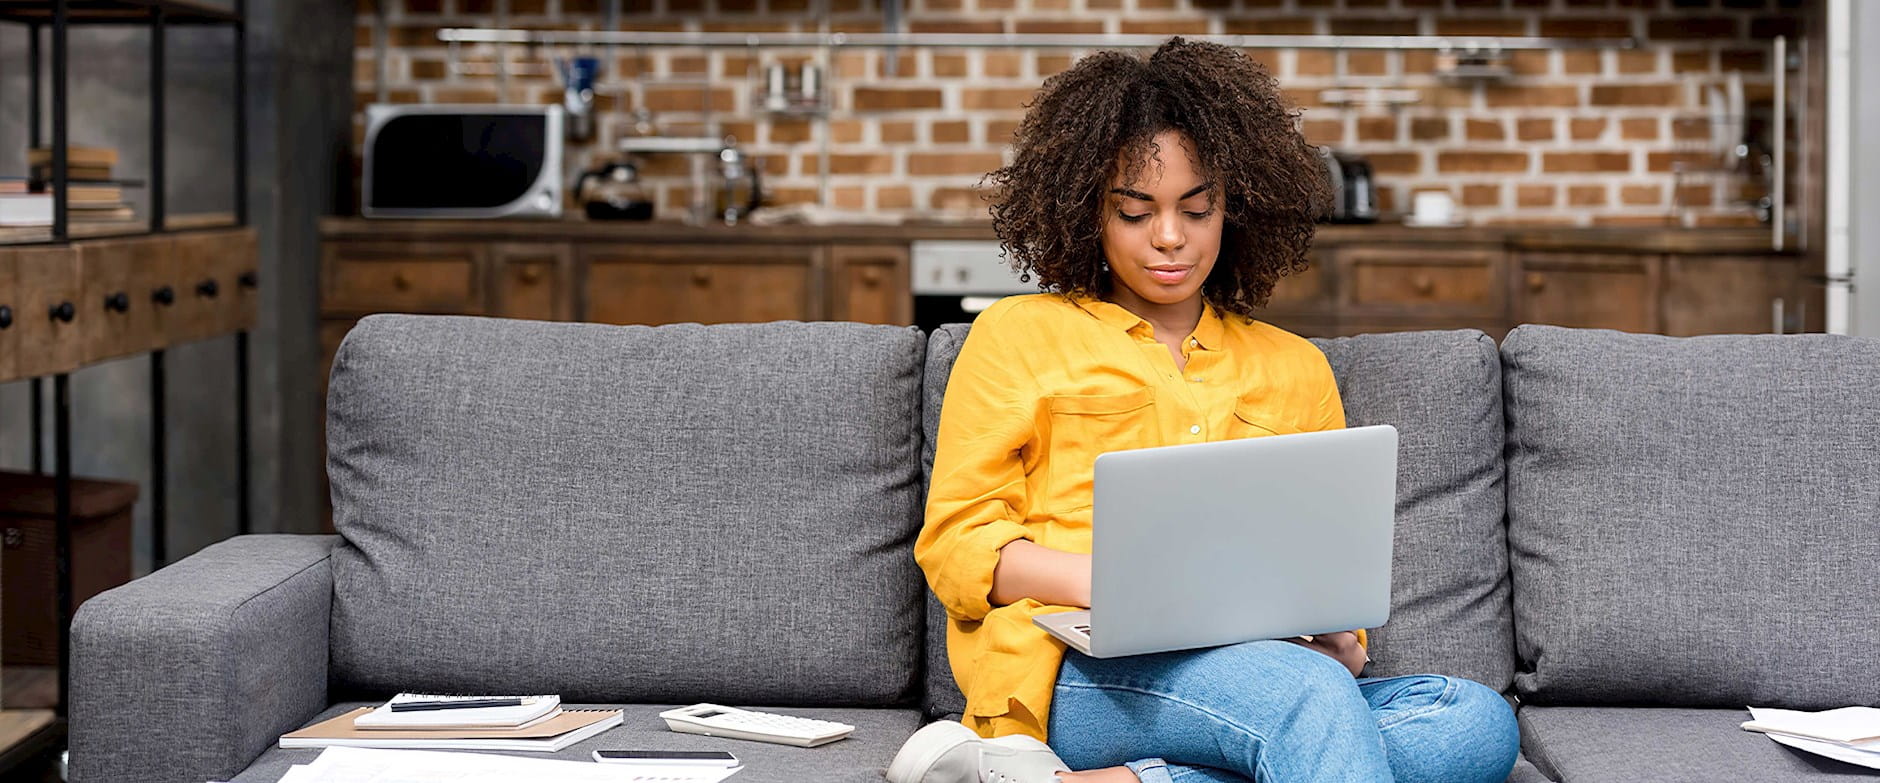 African American woman sitting on a couch using her laptop